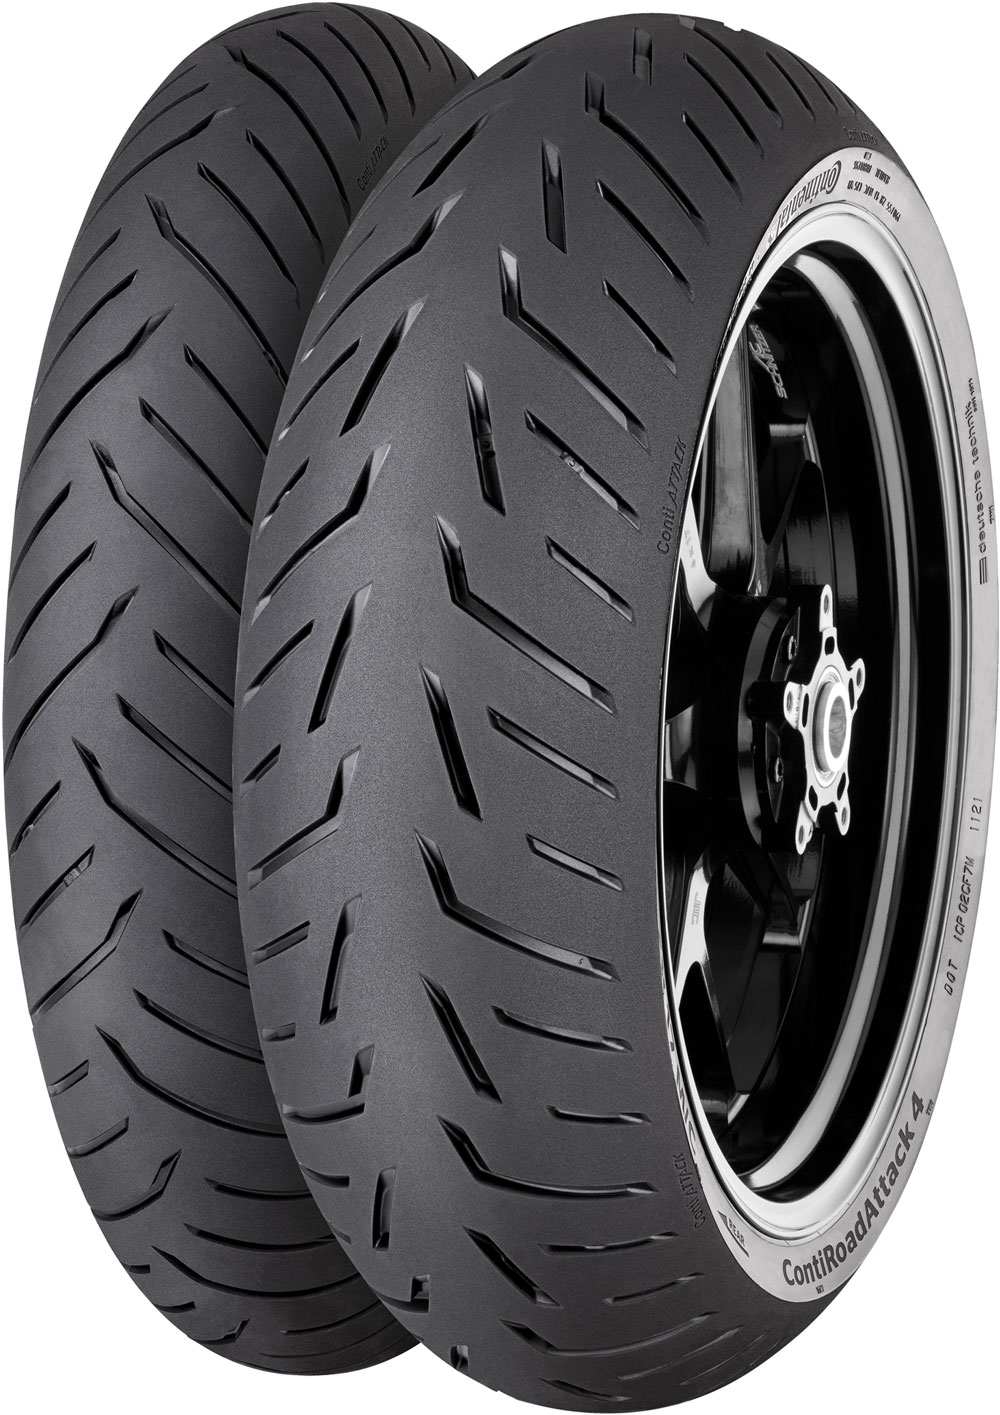 product_type-moto_tires CONTINENTAL RDATTACK4 190/50 R17 73W